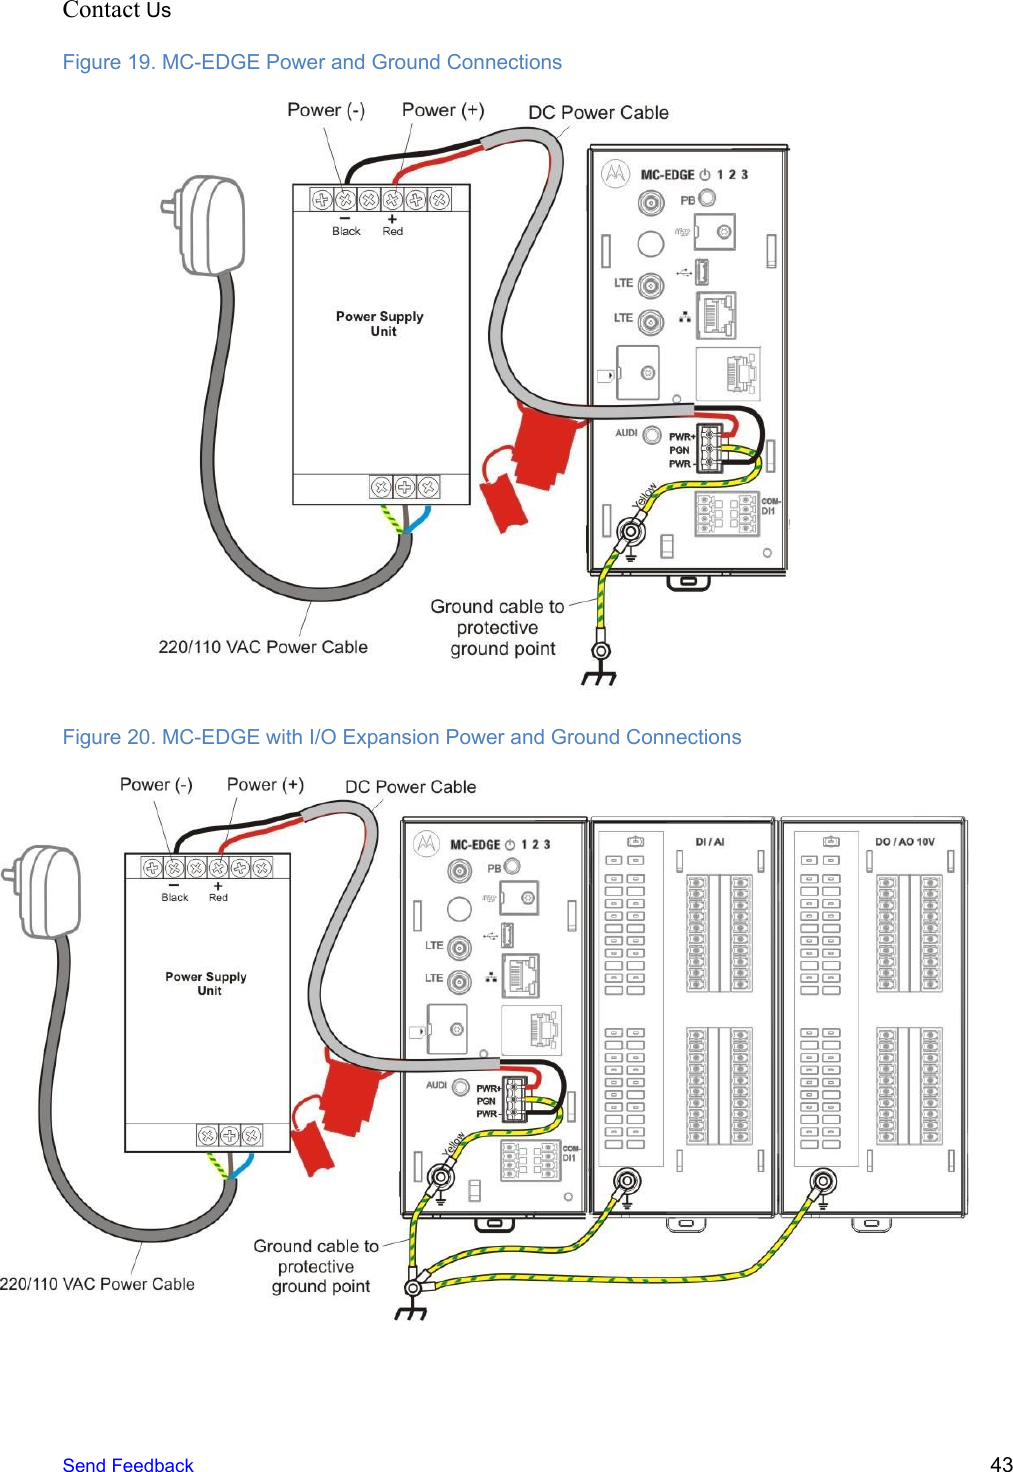 Contact Us     Figure 19. MC-EDGE Power and Ground Connections  Figure 20. MC-EDGE with I/O Expansion Power and Ground Connections    Send Feedback  43 